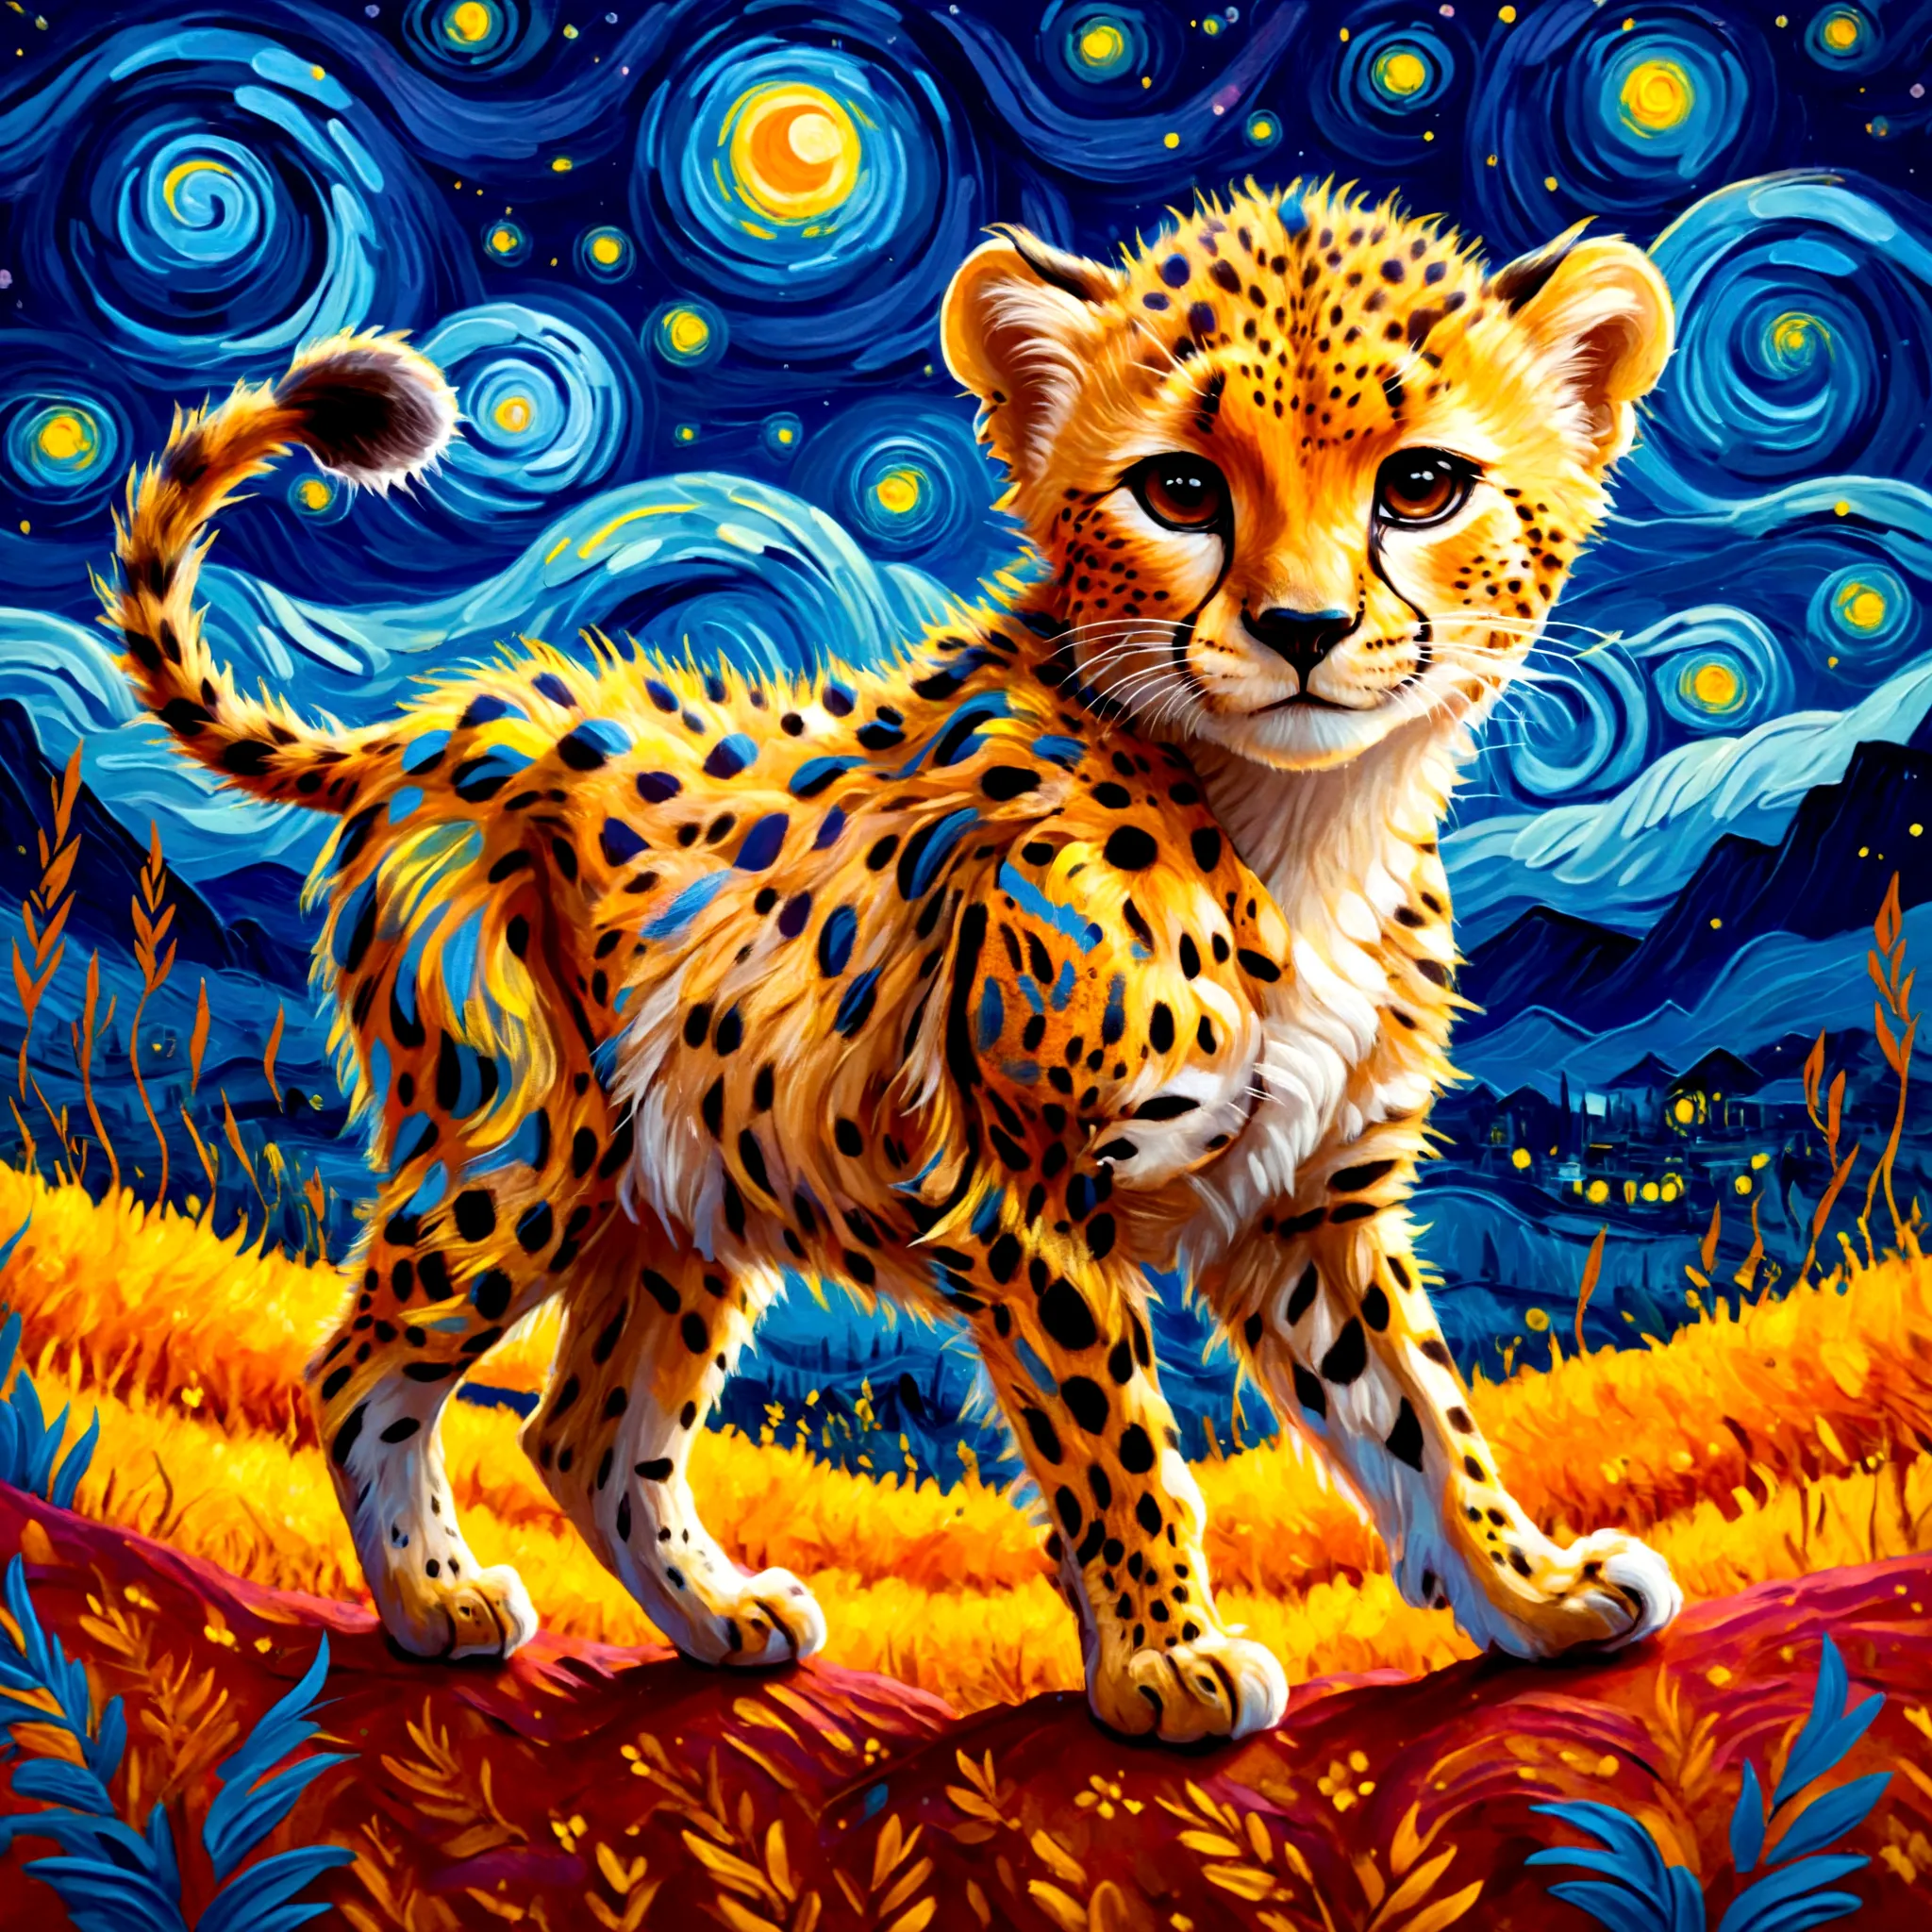 A stylized illustration of a cheetah cub in the style of Van Gogh, with swirling brushstrokes and vibrant colors, 
Vivid contras...